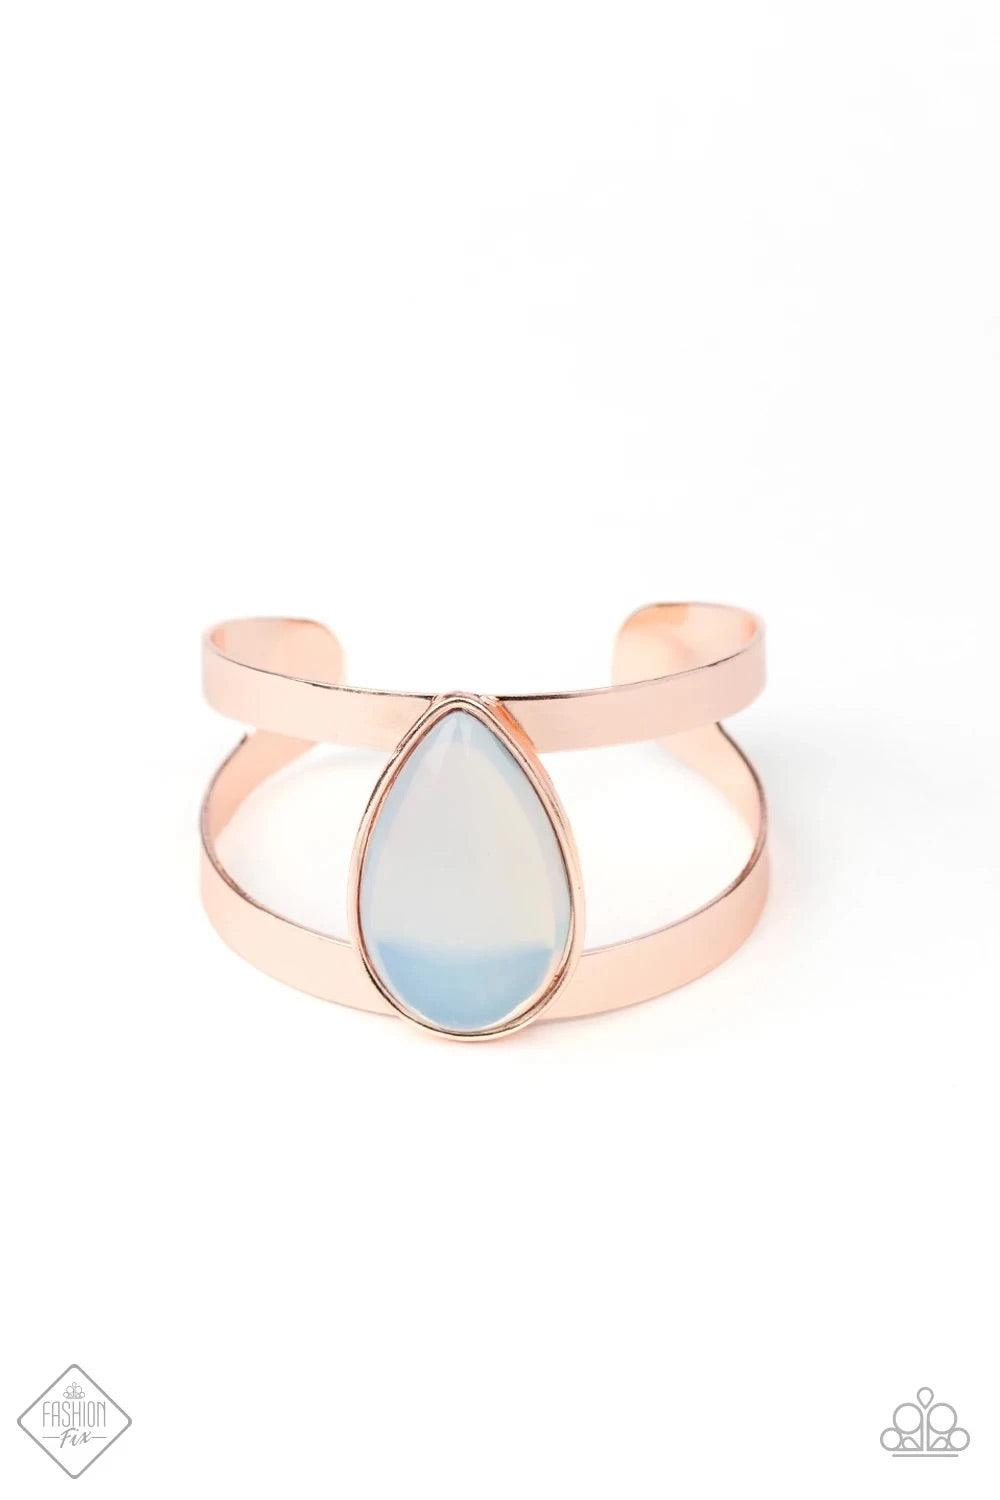 Paparazzi Accessories Optimal Opalescence - Gold Featuring a sleek rose gold frame, an opalescent white teardrop bead sits atop an airy rose gold cuff in an ethereal fashion. Sold as one individual bracelet. Jewelry